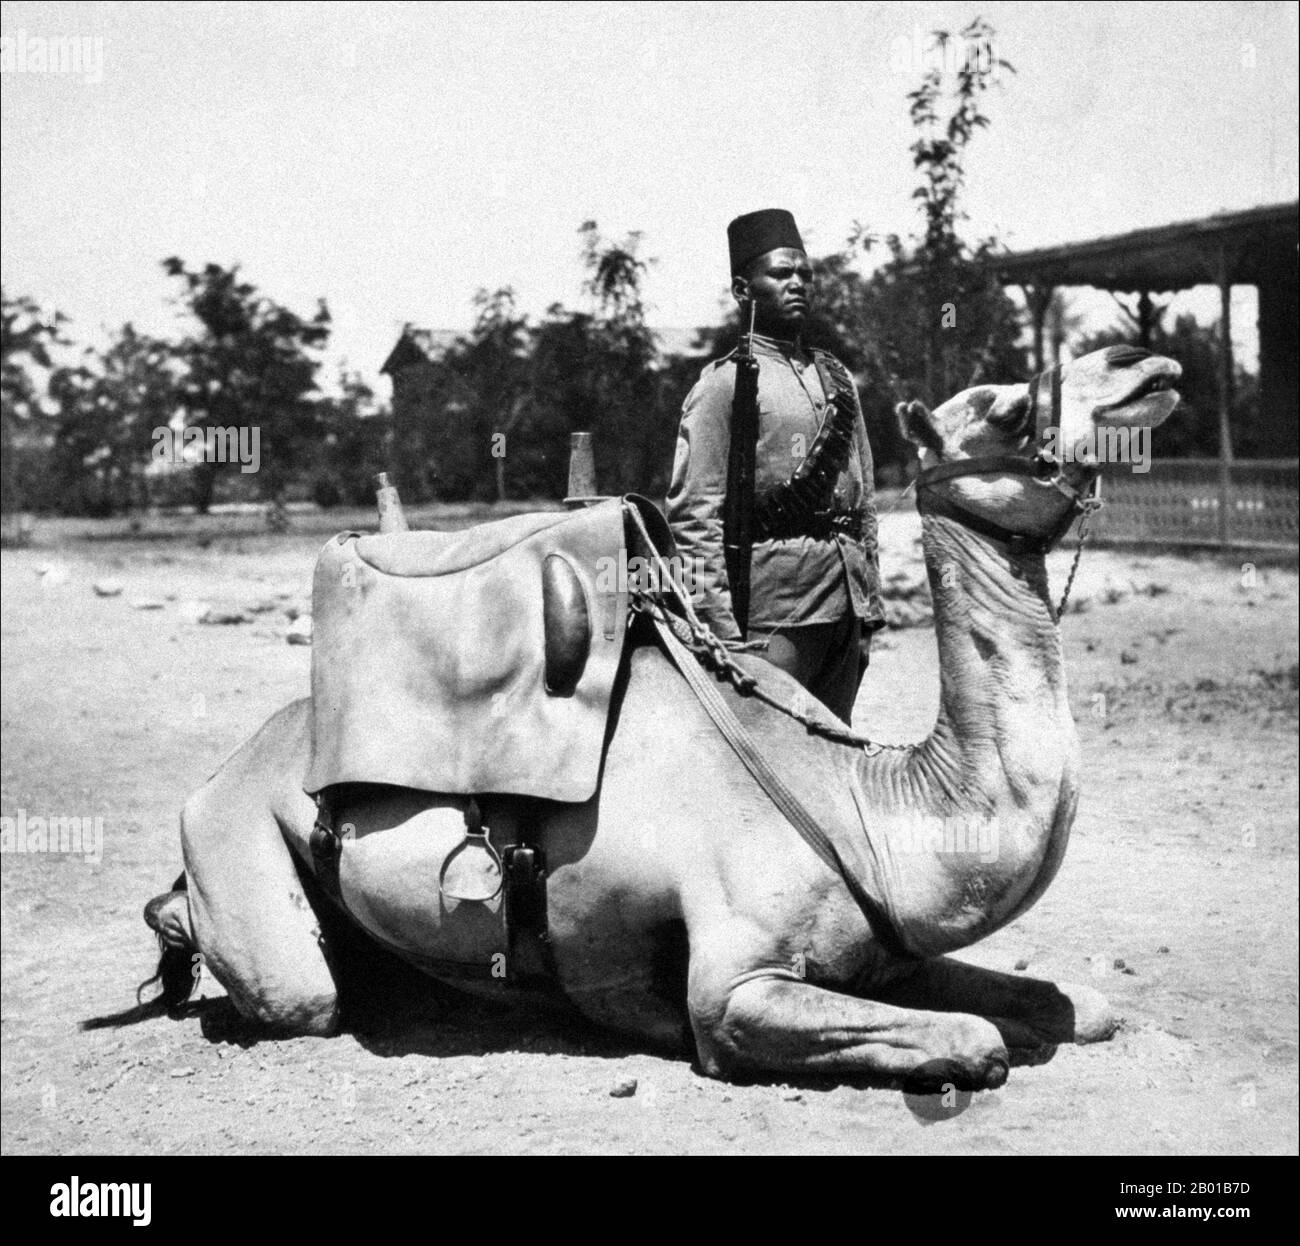 Sudan: A member of the imperial Sudanese Camel Corps of Anglo-Egyptian Sudan. Photo by Frank George Carpenter (8 May 1855 - 18 June 1924) c. 1900-1920.  The term Anglo-Egyptian Sudan refers to the period between 1891 and 1956 when Sudan was administered as a condominium of Egypt and the United Kingdom. Sudan (comprising modern-day Sudan and South Sudan) was de jure shared legally between Egypt and the British Empire, but was de facto controlled by the latter, with Egypt only enjoying limited local power in reality as Egypt itself fell under increasing British influence. Stock Photo